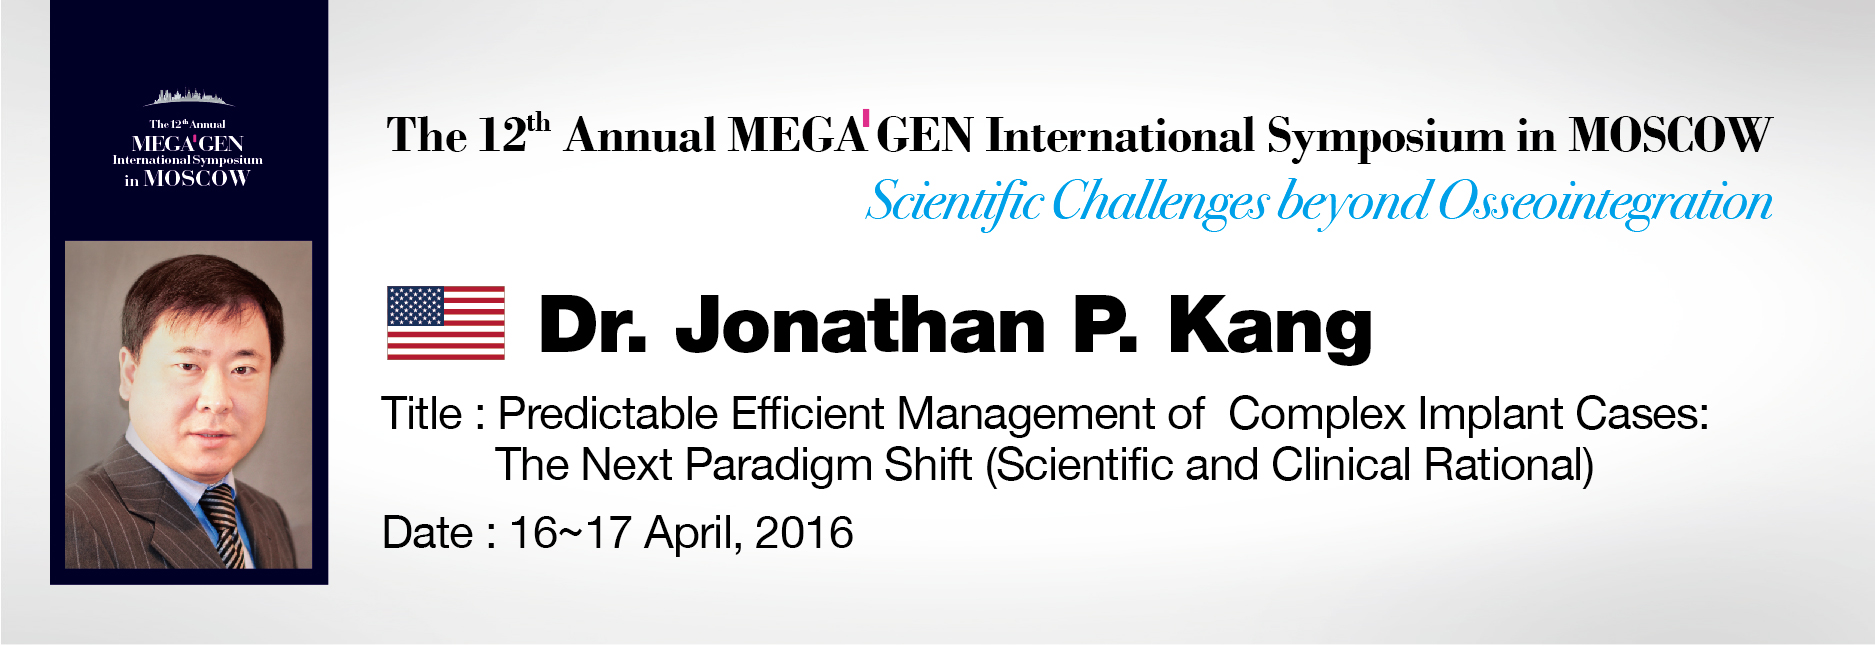 Predictable Efficient Managemnet of Complex Implant Cases : The Next Paradigm Shift (Scientific and Clinical Rational) 